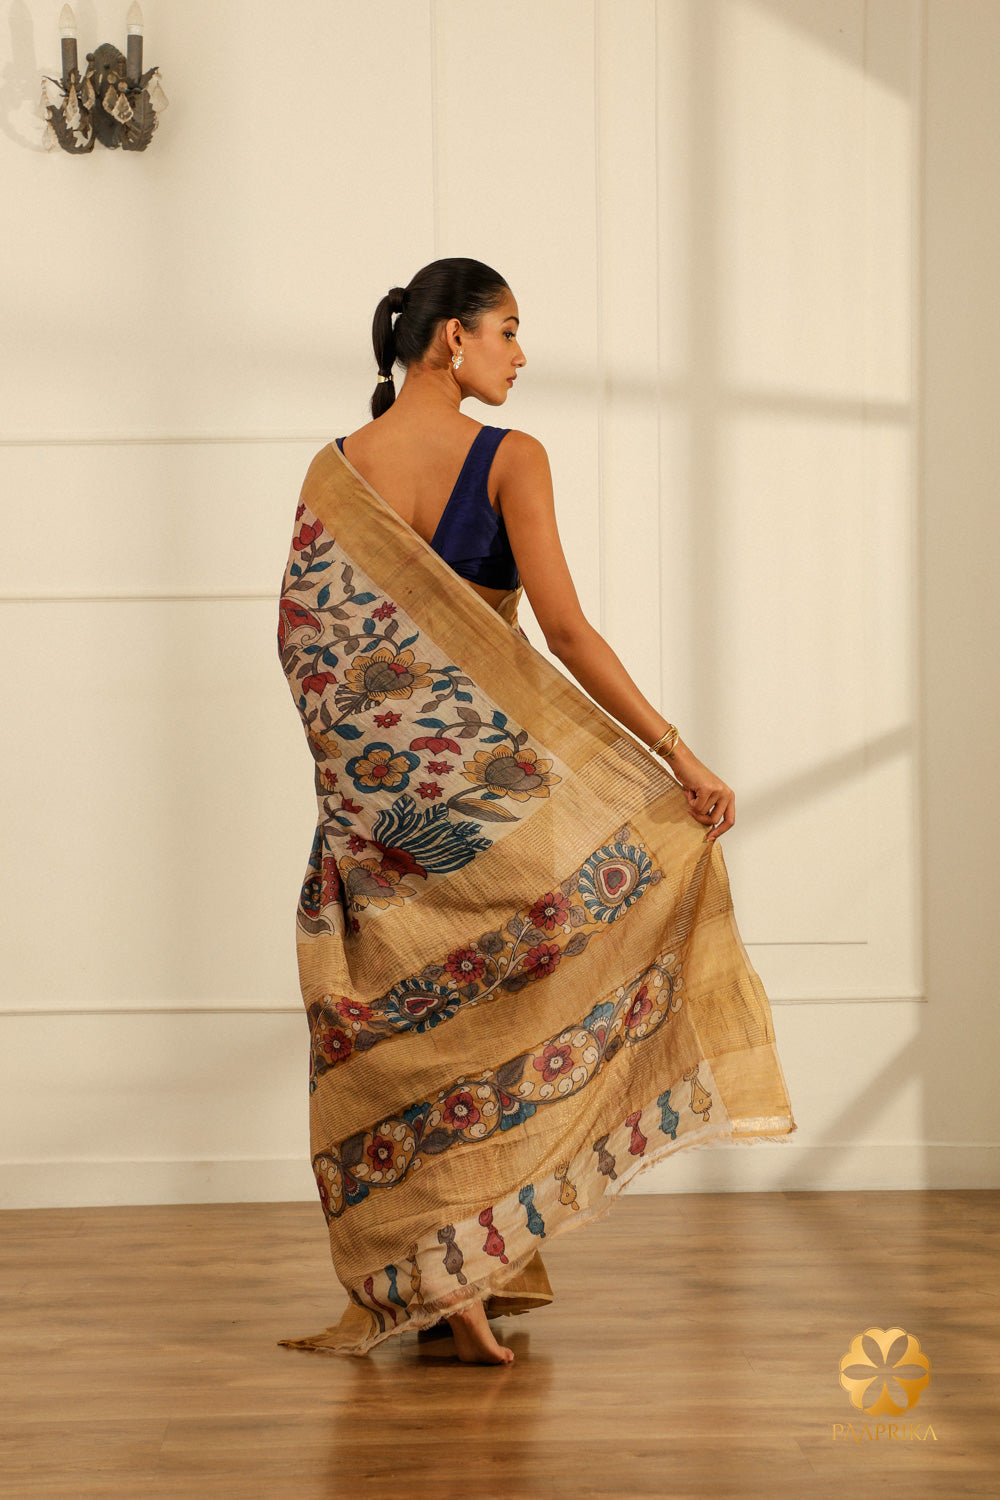 A full-length shot of a woman gracefully draped in the Cream Tussar Silk Saree, showcasing its elegance and the artistic floral creepers and leaves motifs.